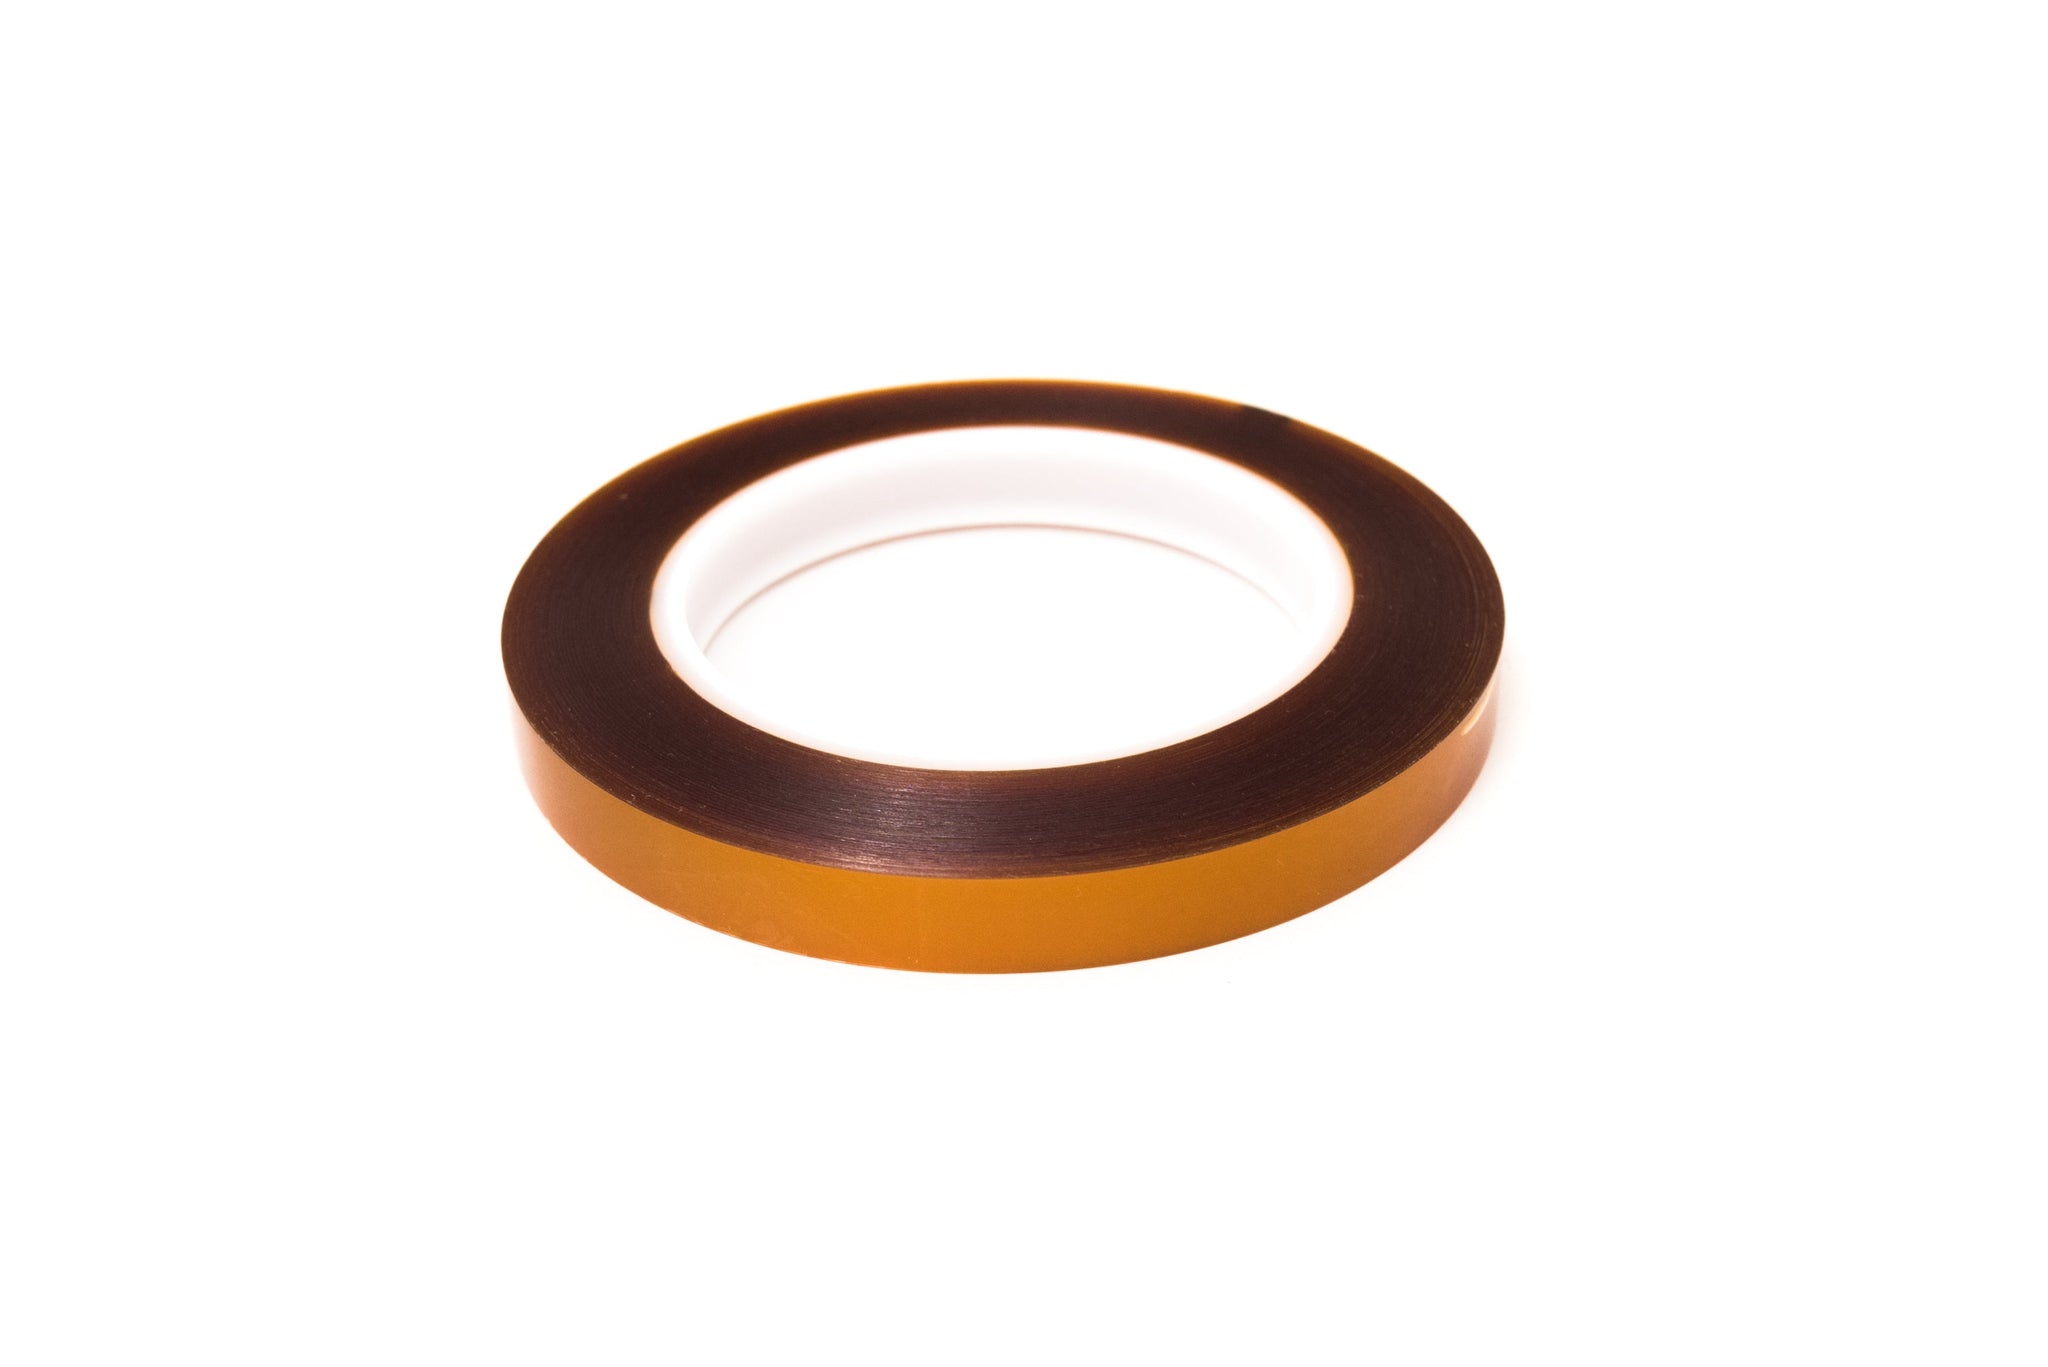 Double Sided Kapton Tape - Adhesive Tape & Protective Film & Die